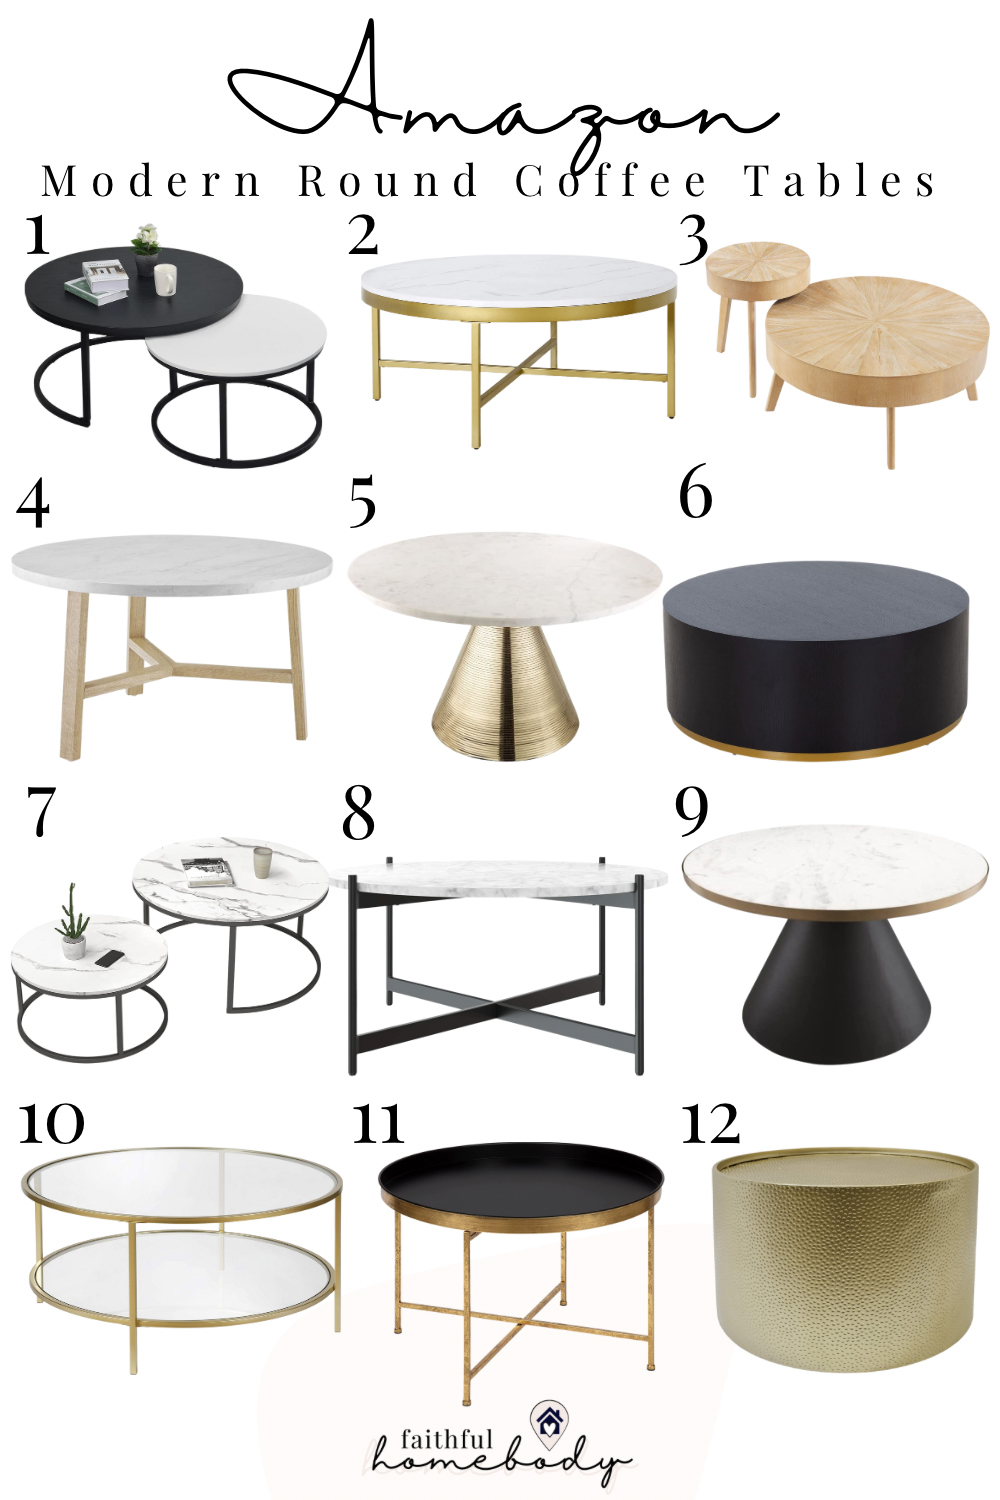 Affordable Round Coffee Tables from Amazon. 12 modern coffee tables featuring brass & gold finishes, metal, glass, wood, marble, & faux marble. Modern Coffee Tables | Transitional Coffee Tables | Mid-Century Modern Coffee Tables